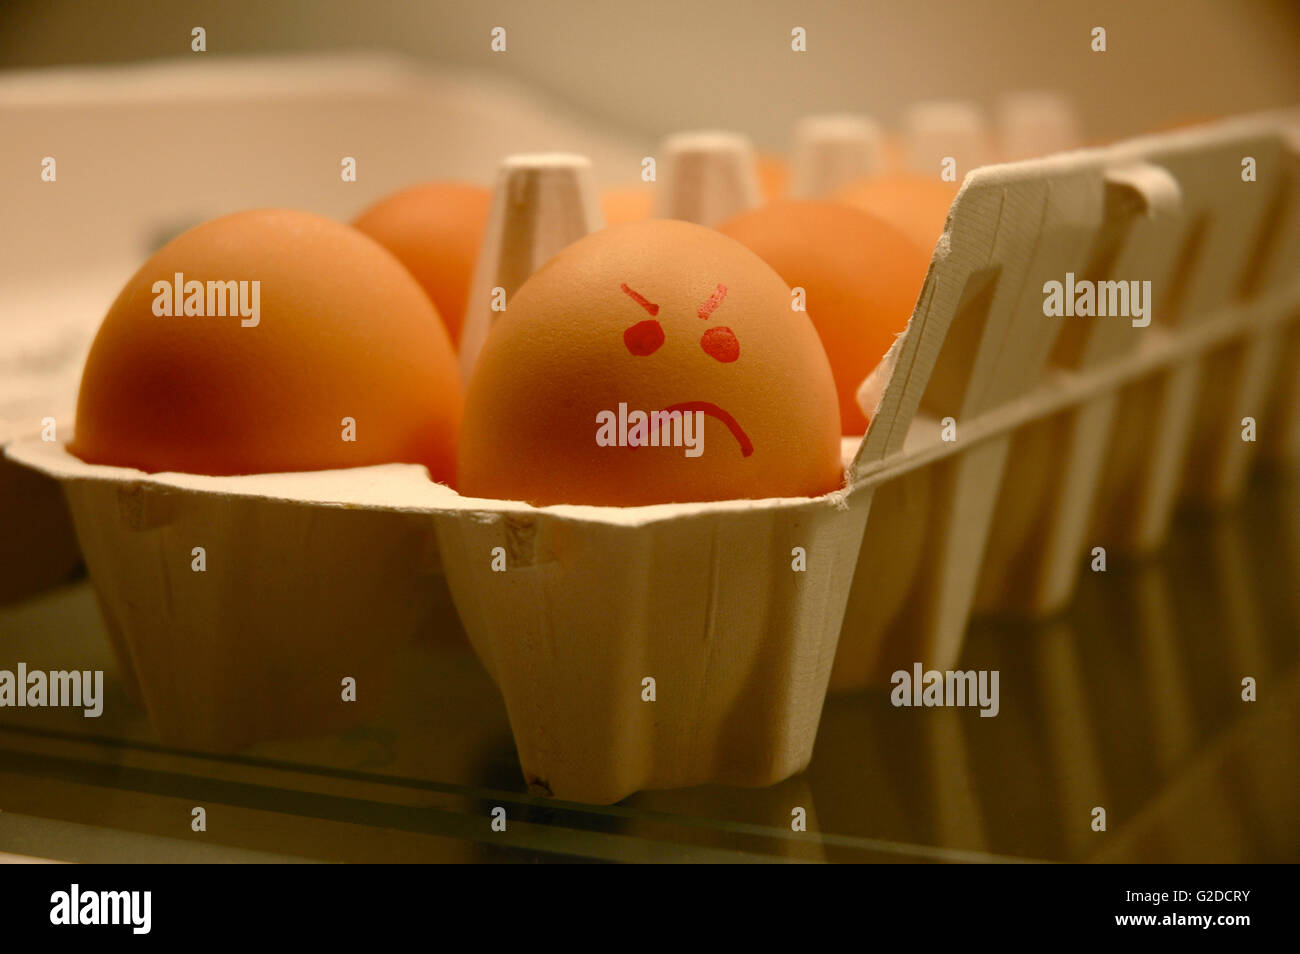 Carton of Eggs with one Egg Displaying an Angry Face Stock Photo